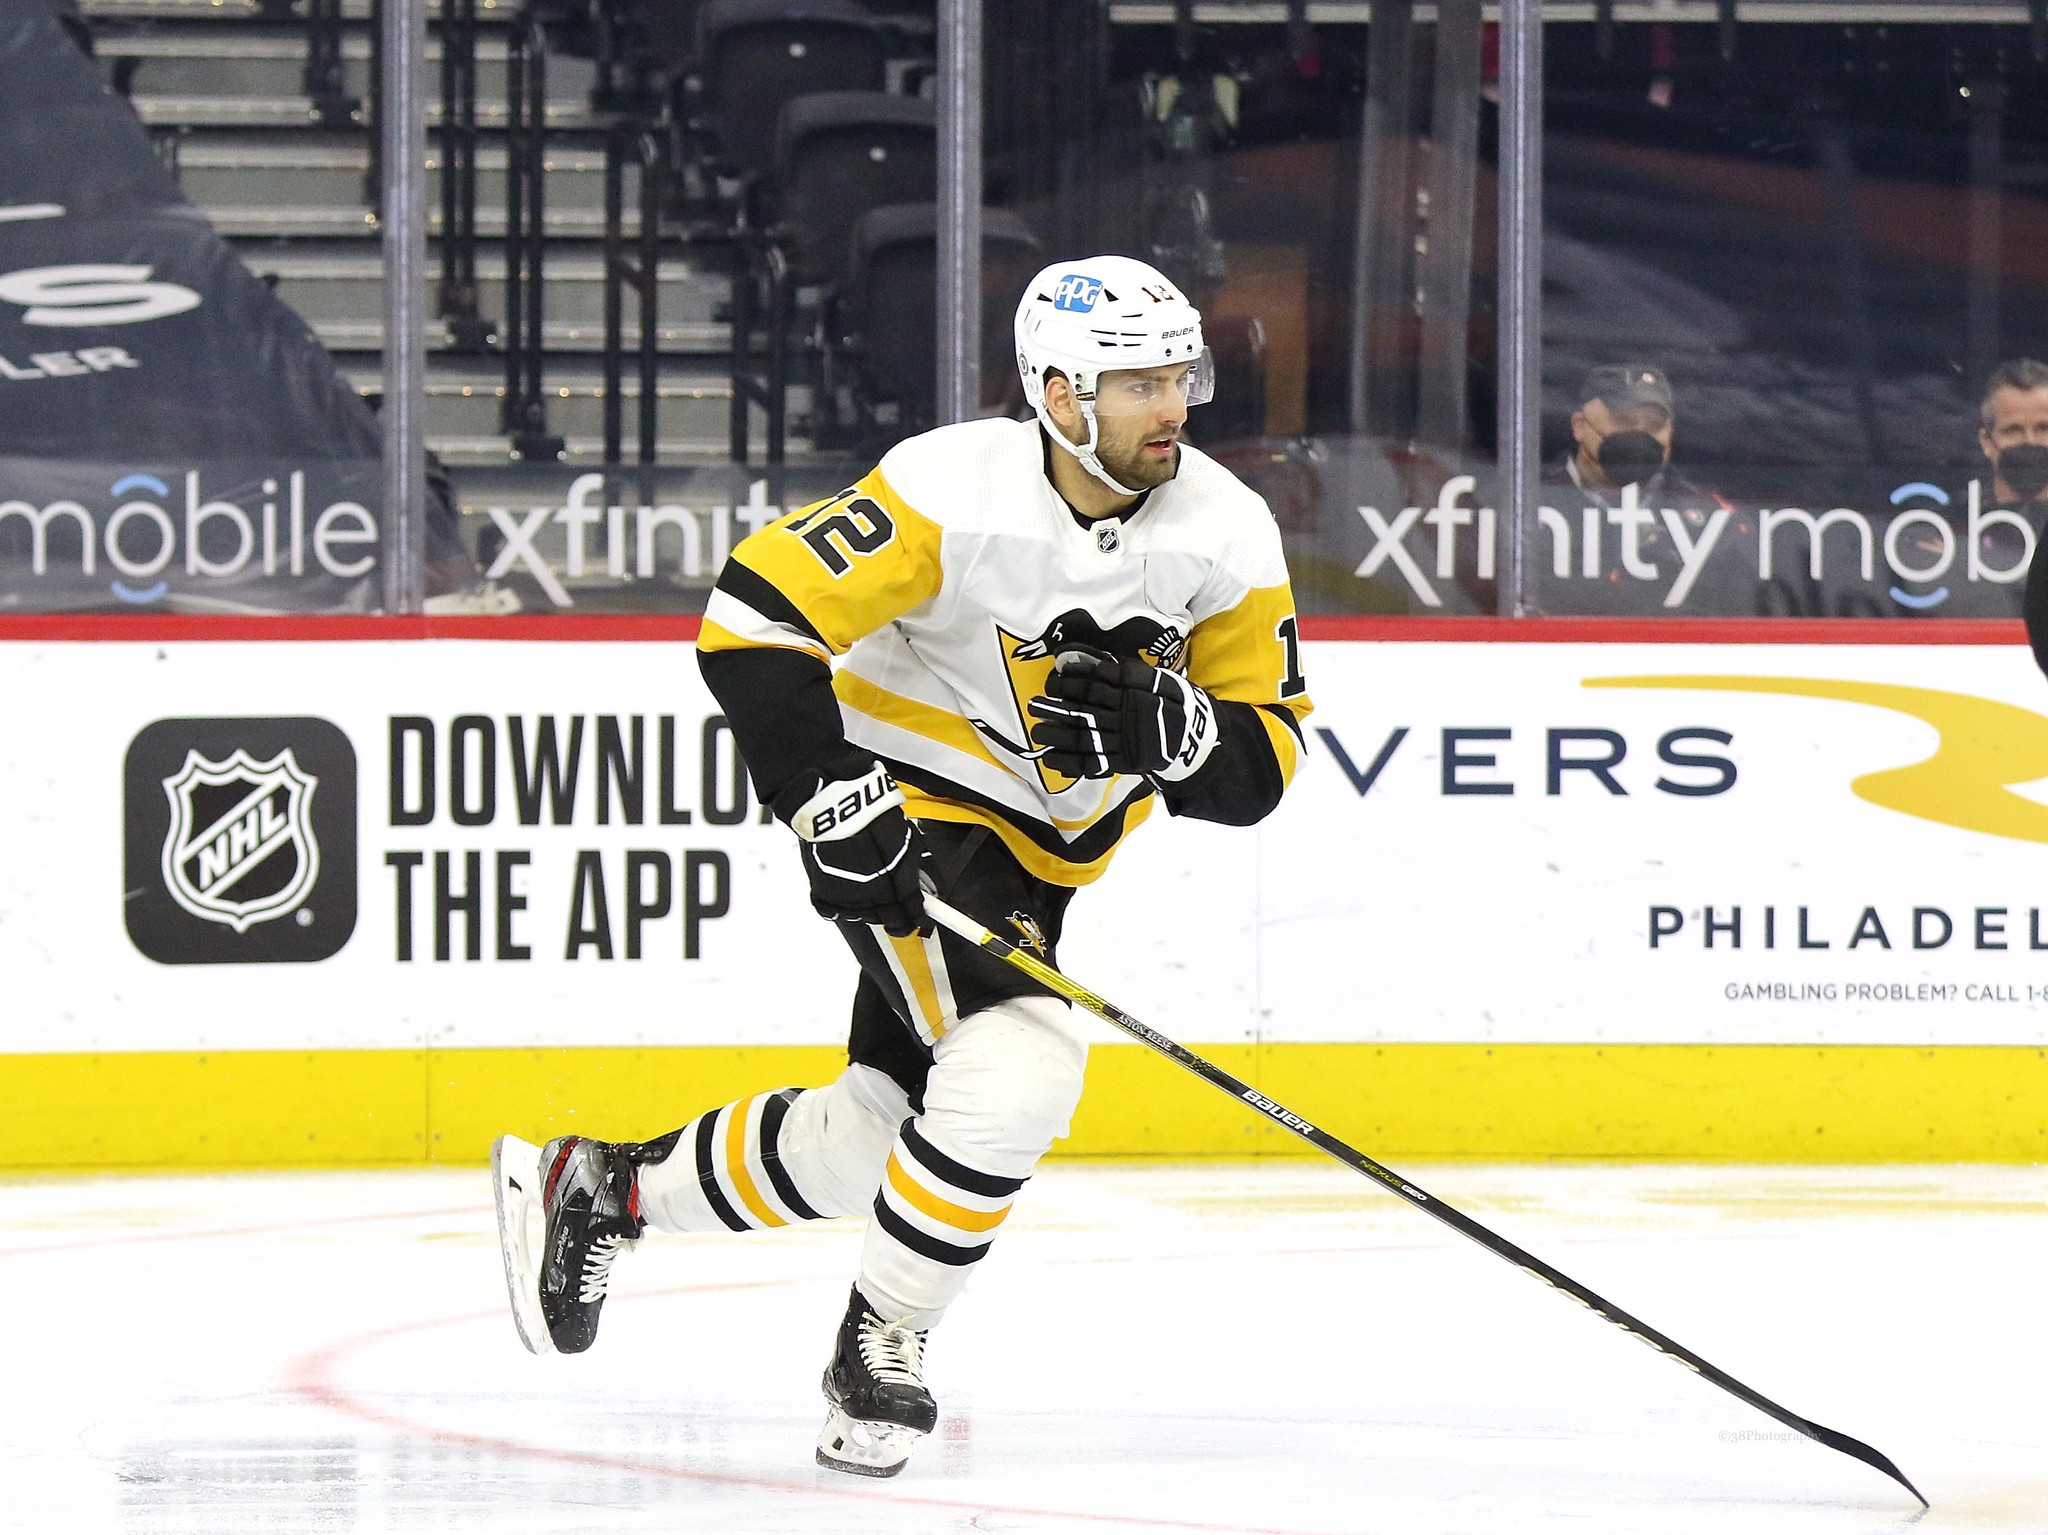 Zach Aston-Reese - NHL Center - News, Stats, Bio and more - The